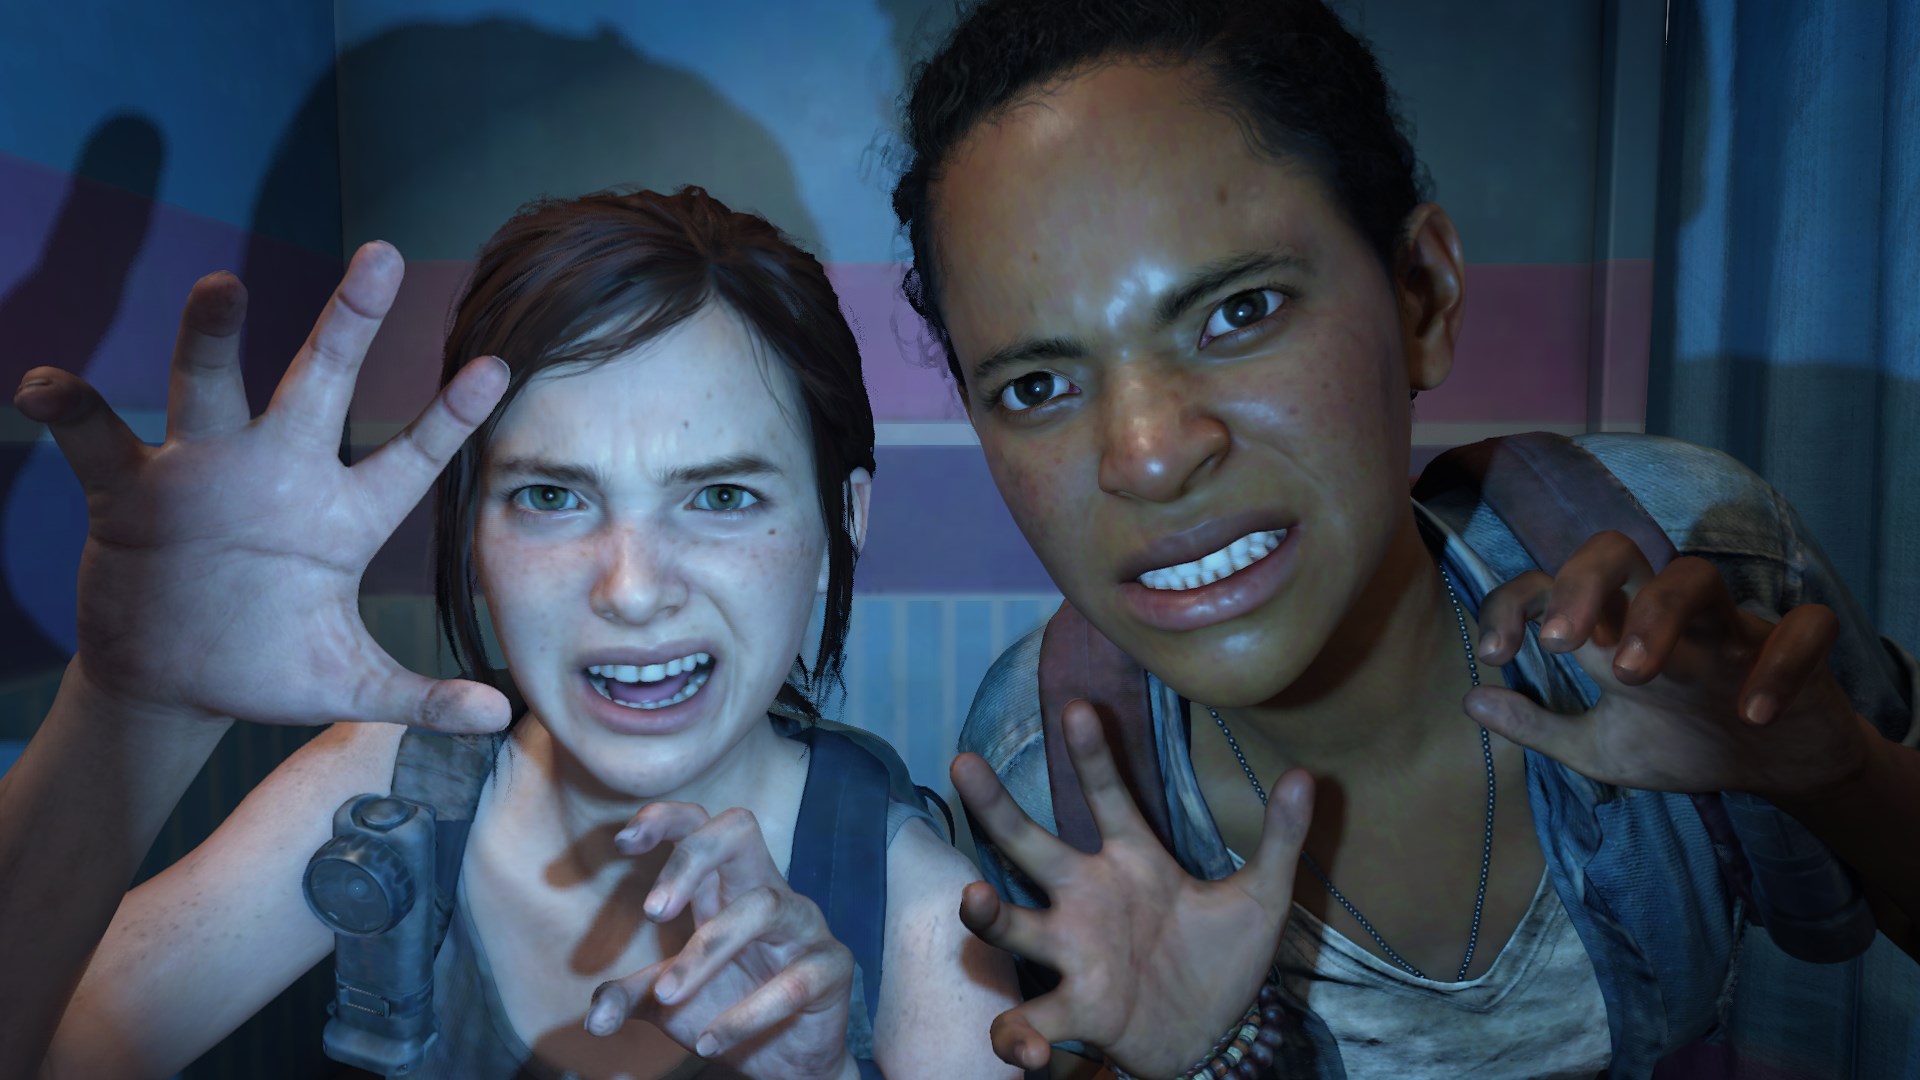 Ellie and Riley making a scary face in the Left Behind DLC of The Last of Us Part 1